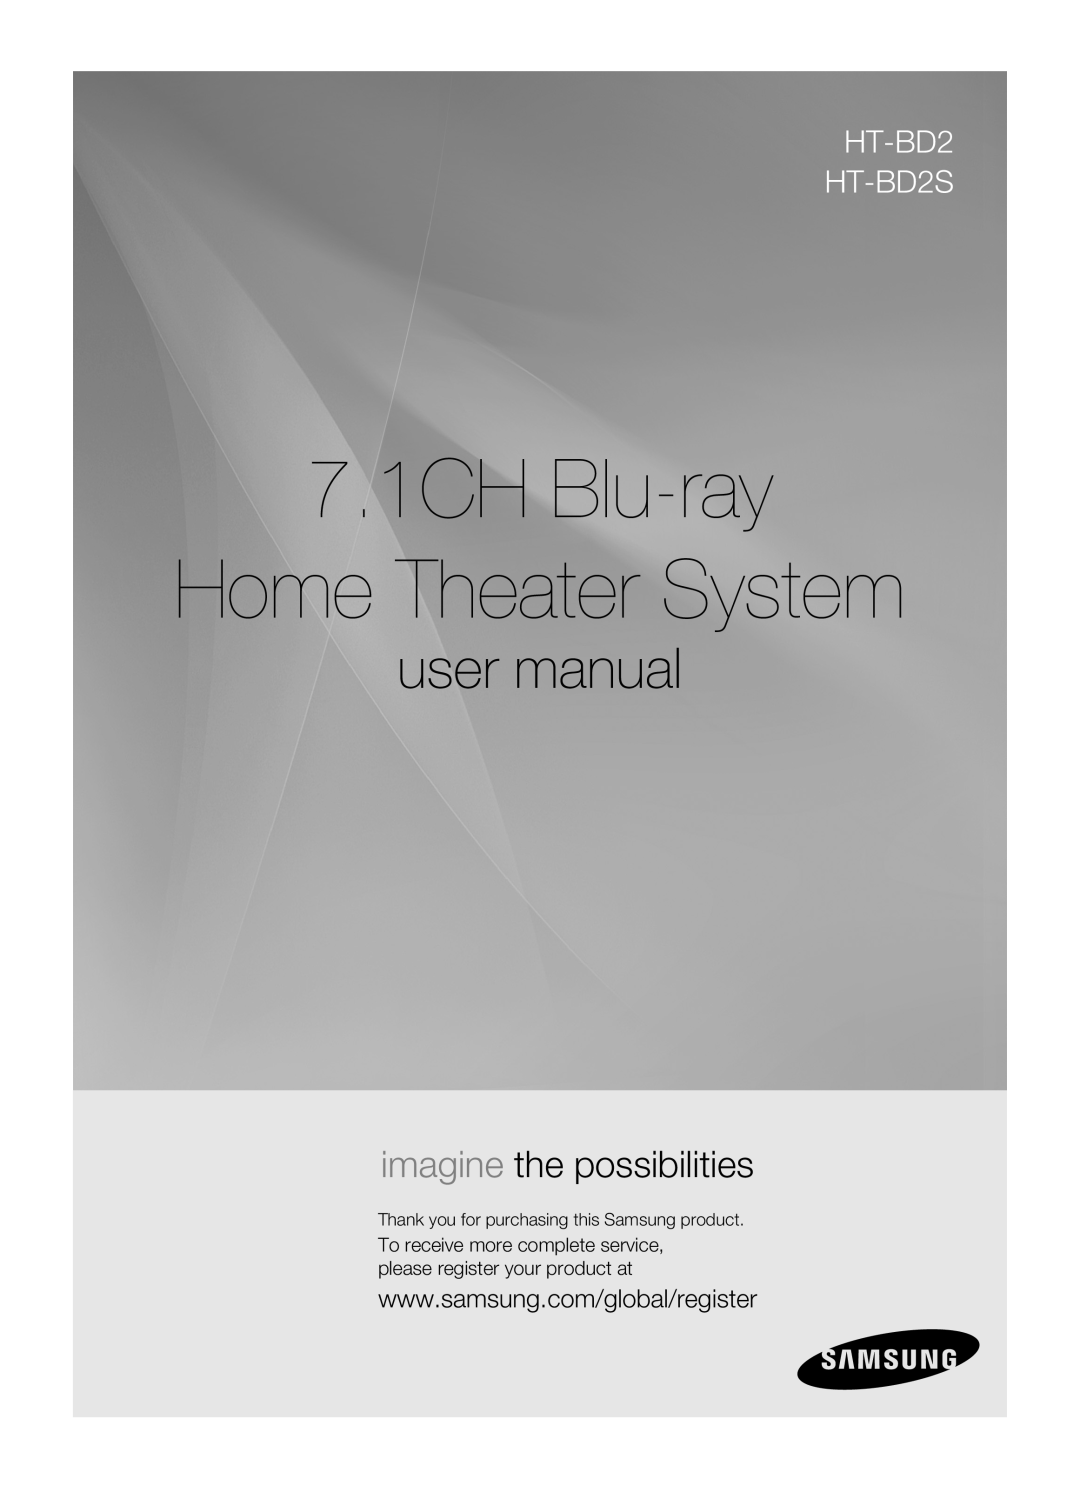 Samsung 7.1CH Blu-ray Home Theater System, user manual, imagine the possibilities, HT-BD2 HT-BD2S 